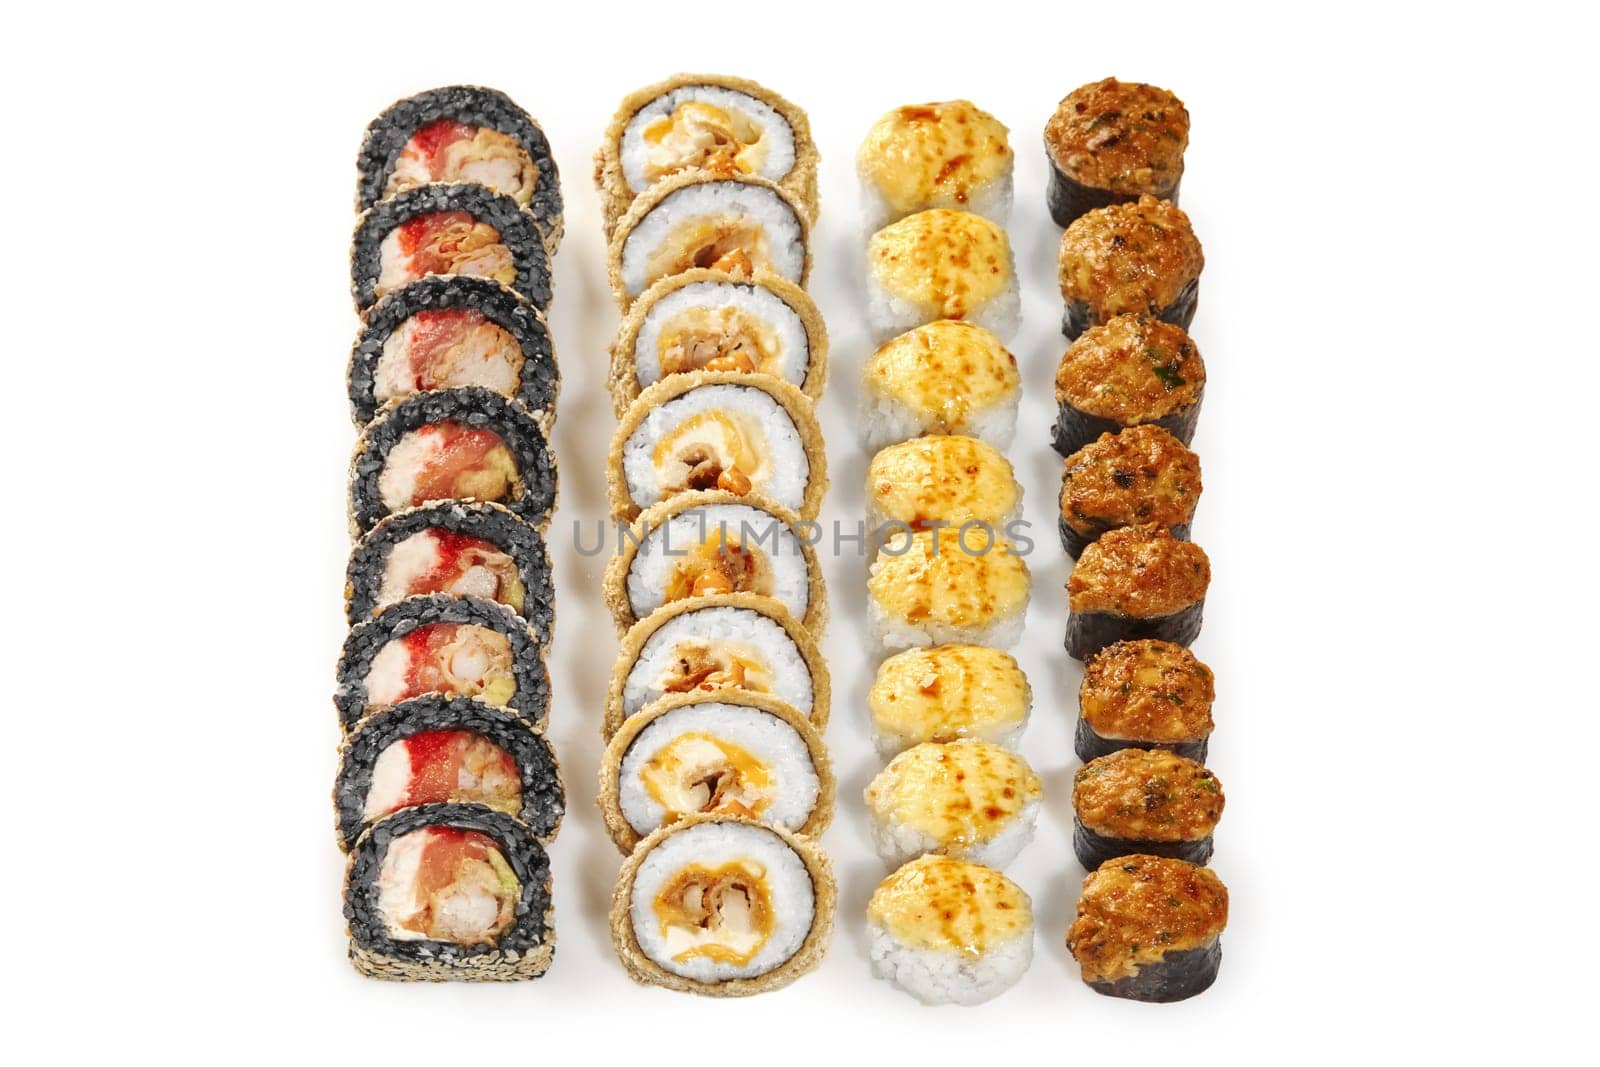 Baked rolls with golden cheese caps, black rice uramaki with shrimp and crispy tempura rolls with fried chicken displayed isolated on white background. Japanese style snacks